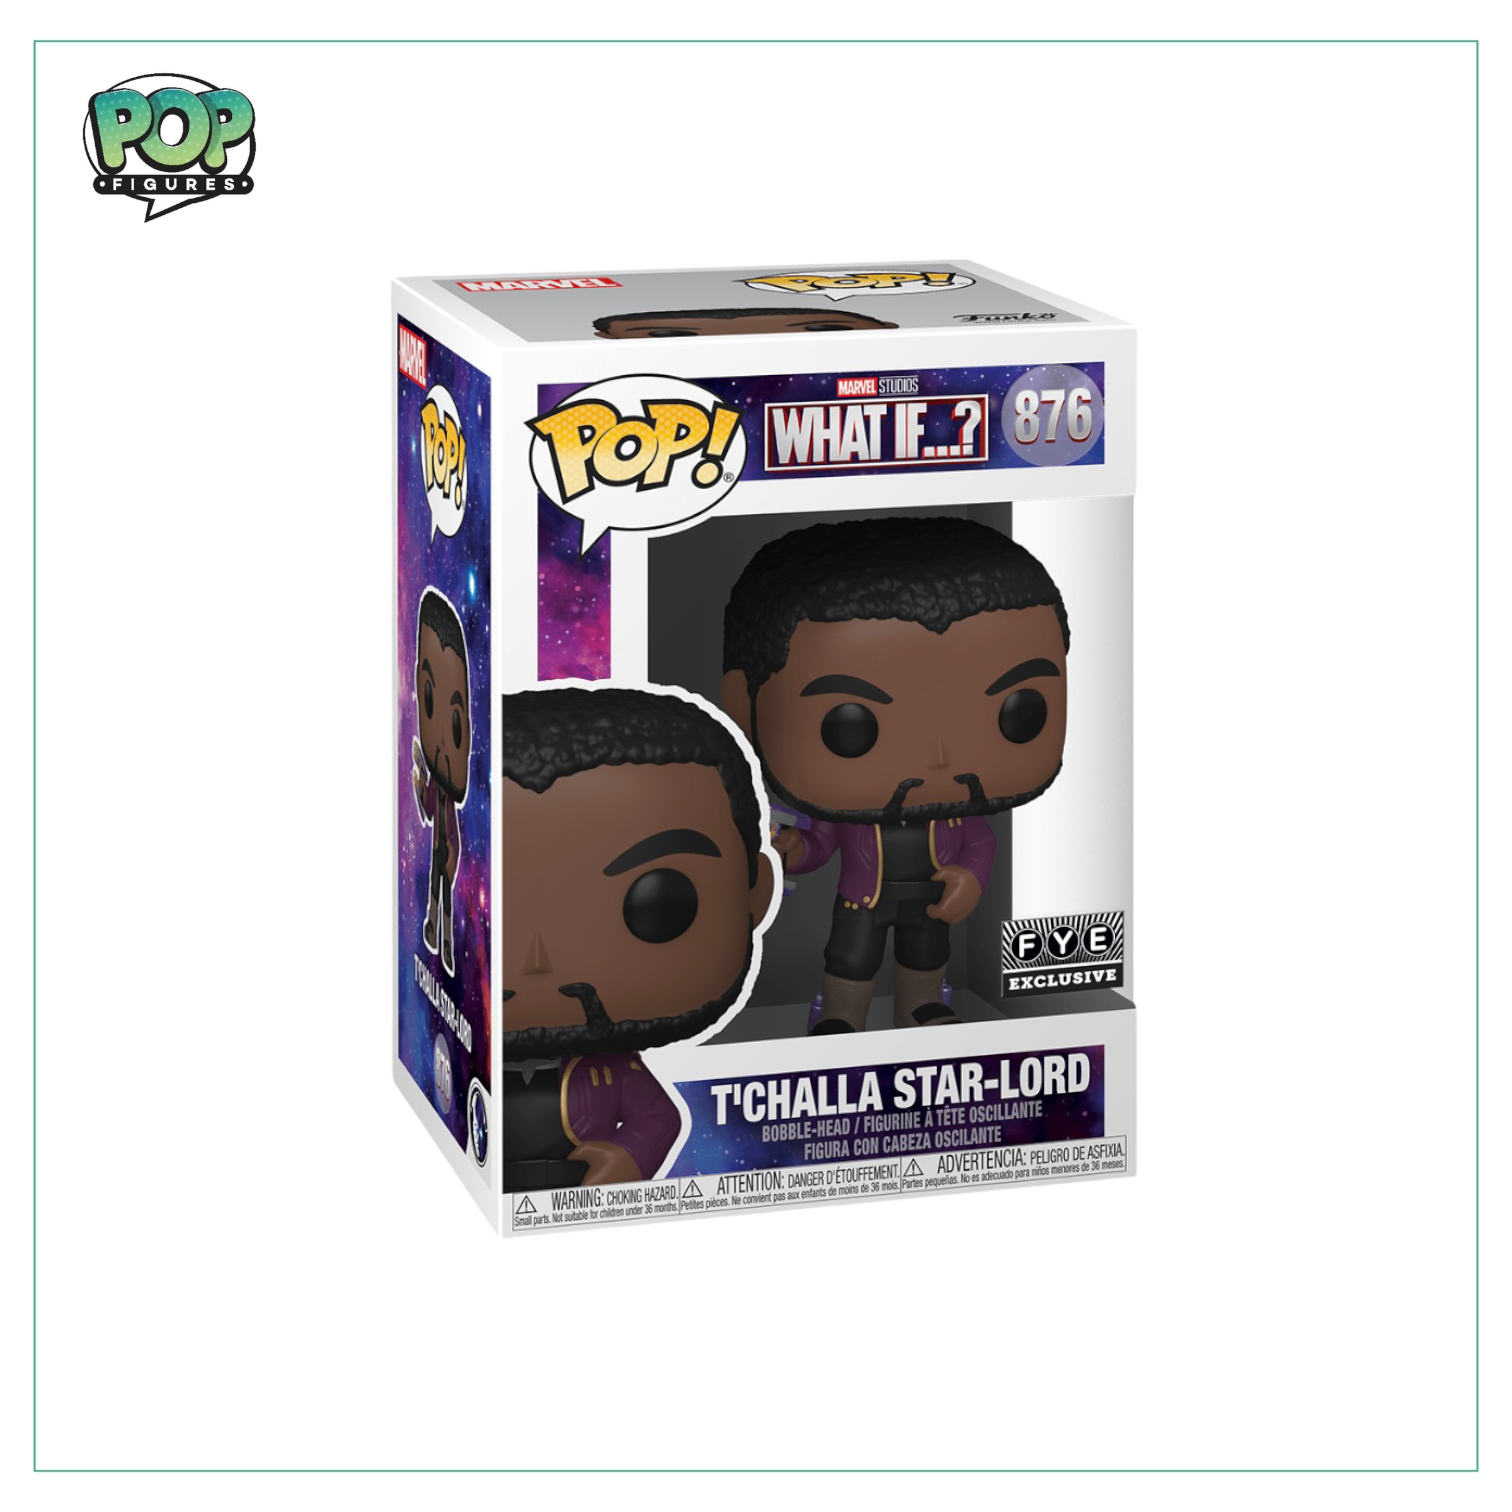 T’Challa Star Lord #876 Funko Pop! What If? FYE Exclusive - Angry Cat